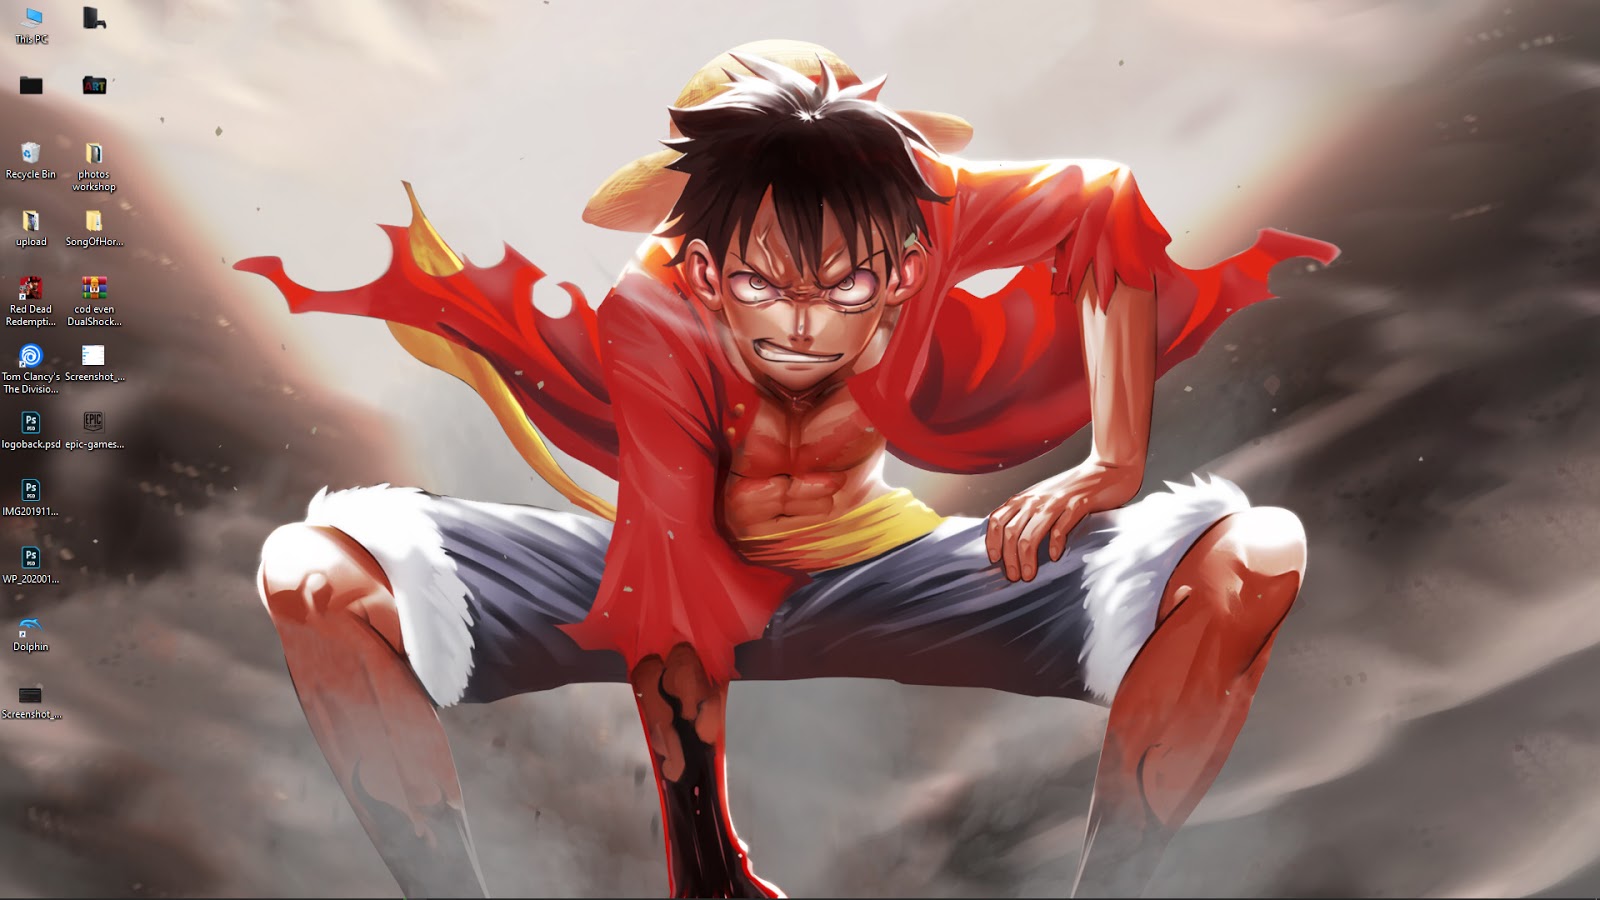 Luffy One Piece live wallpaper free download - wallpaper engine